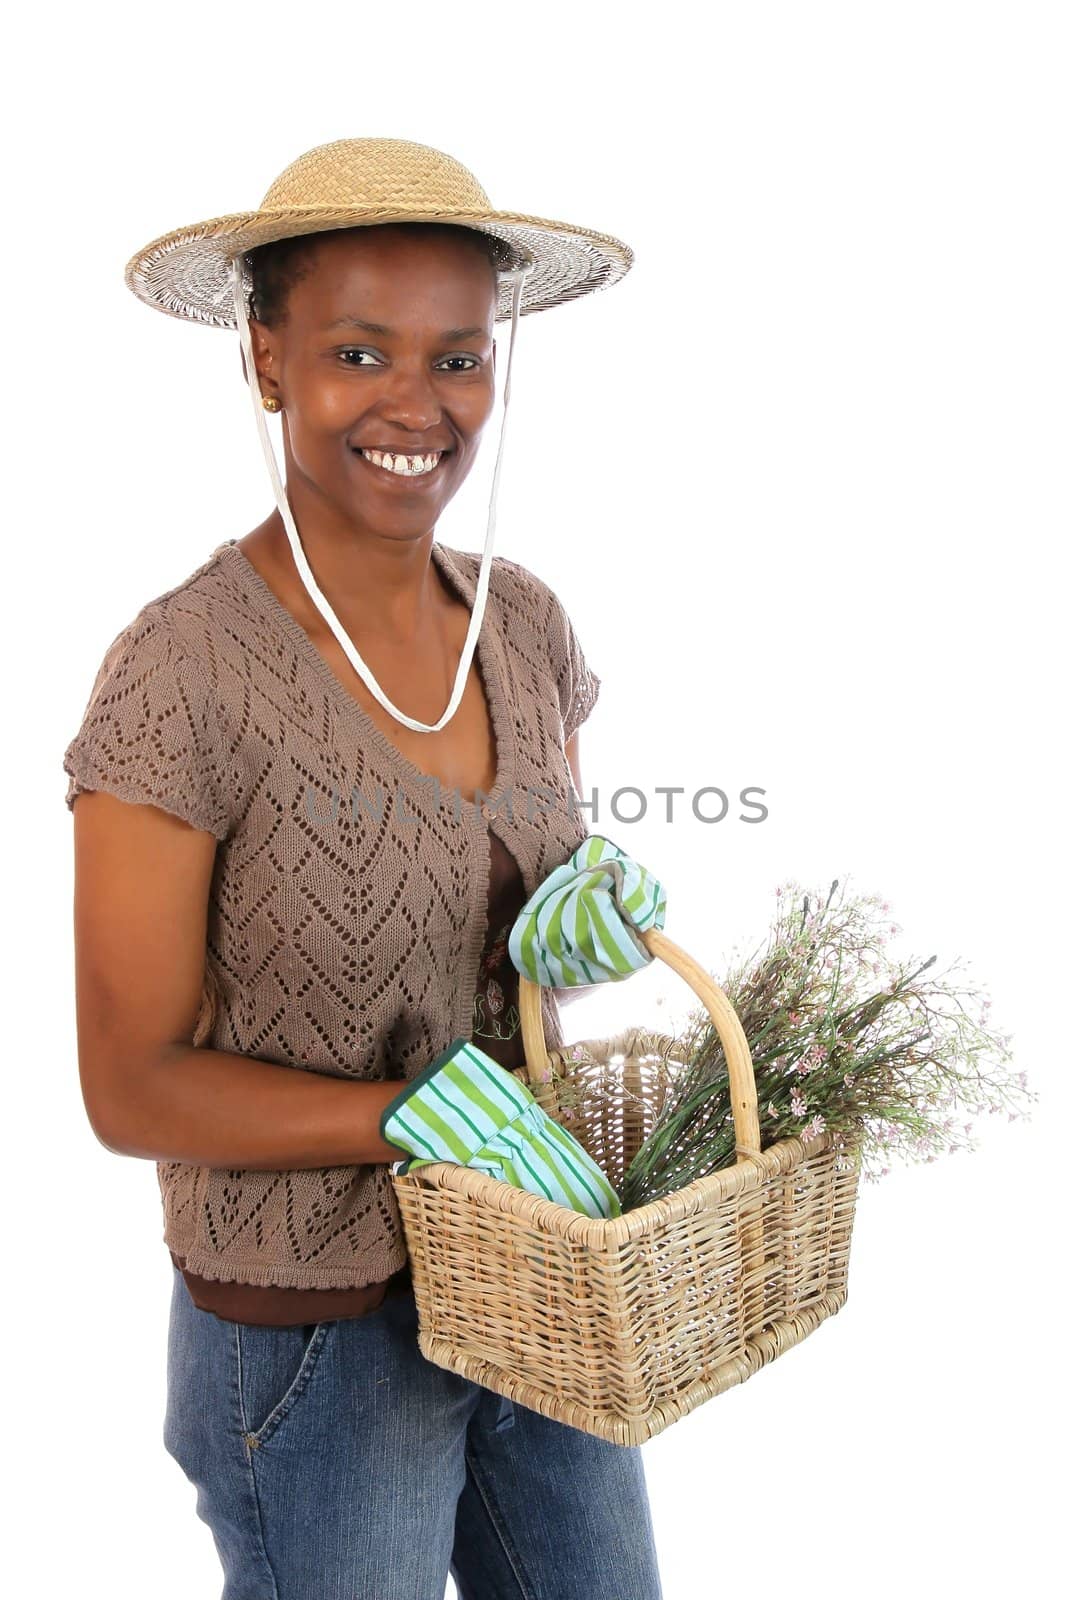 Lovely African American gardening woman with basket of flowers